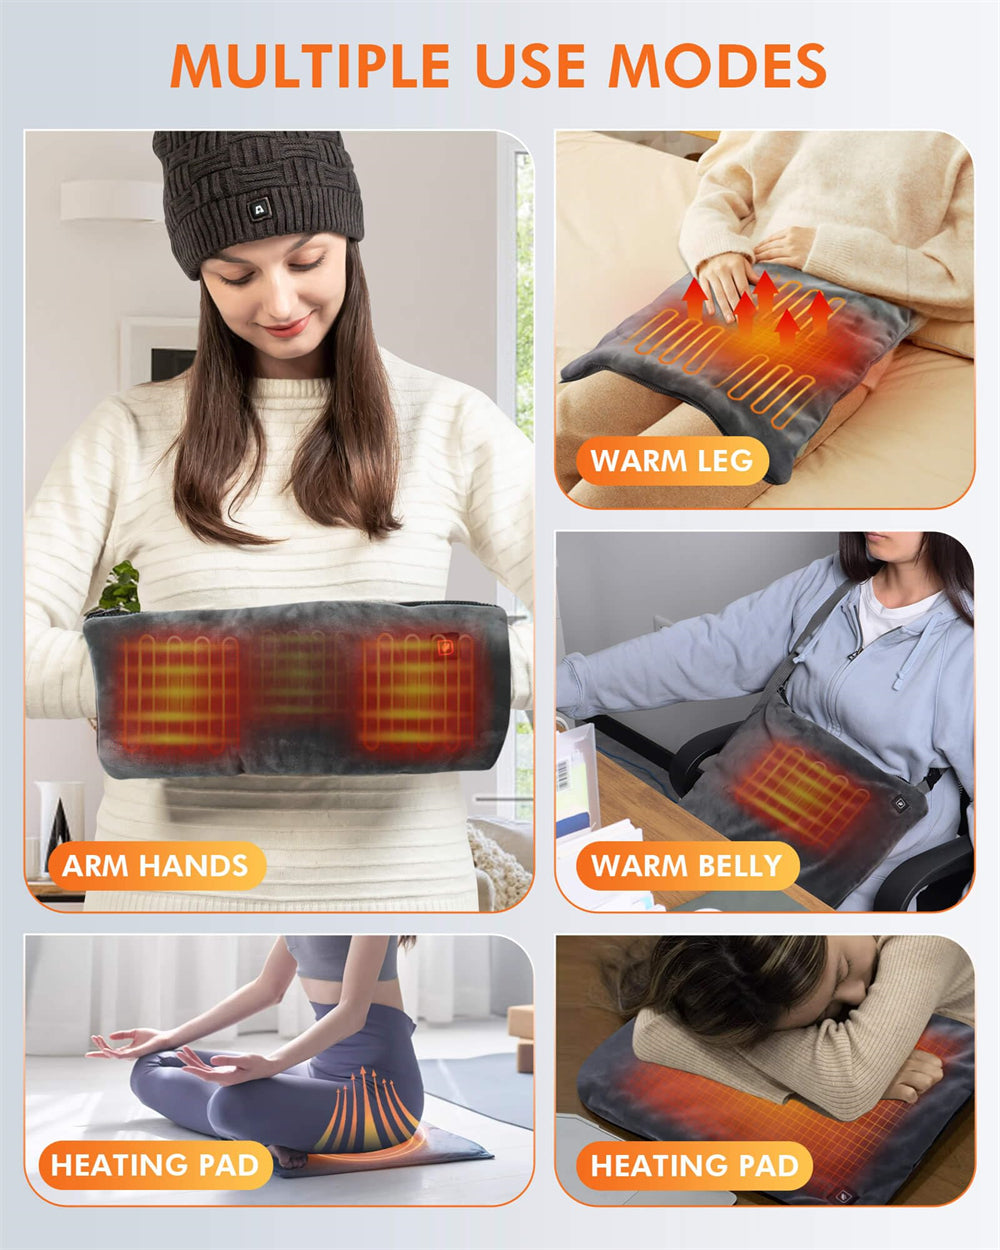 best selling heating pad , to warm hands, leg, belly, back, etc